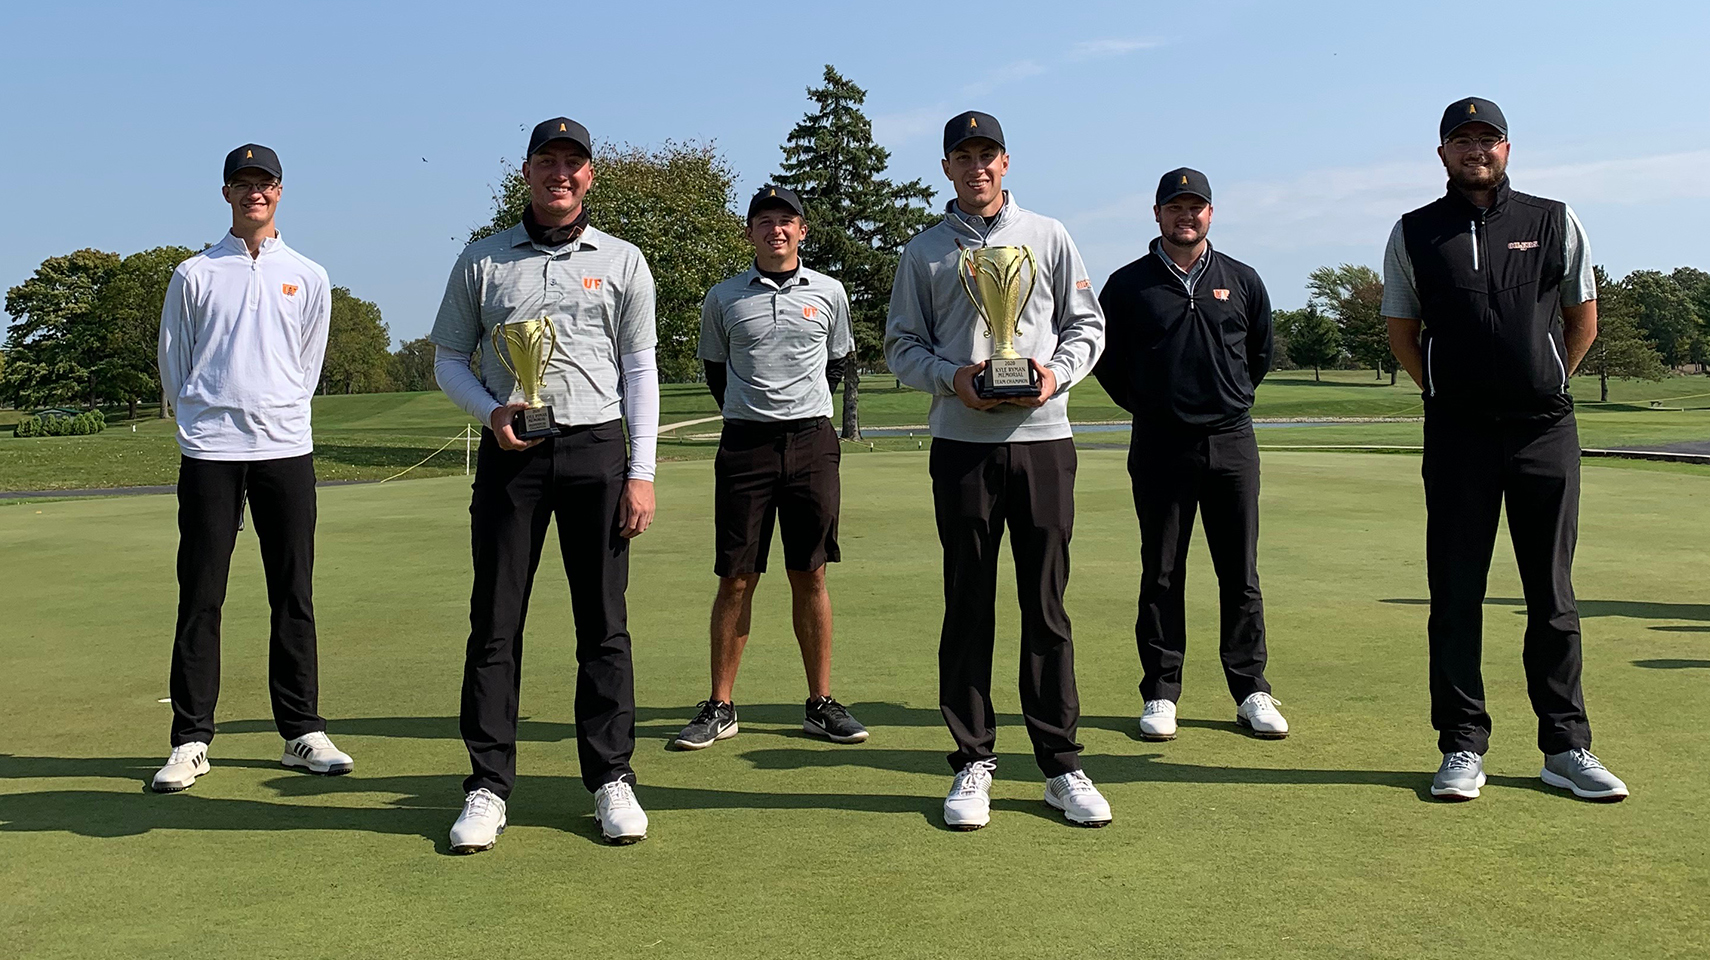 Men's golf team holding trophies while social distancing